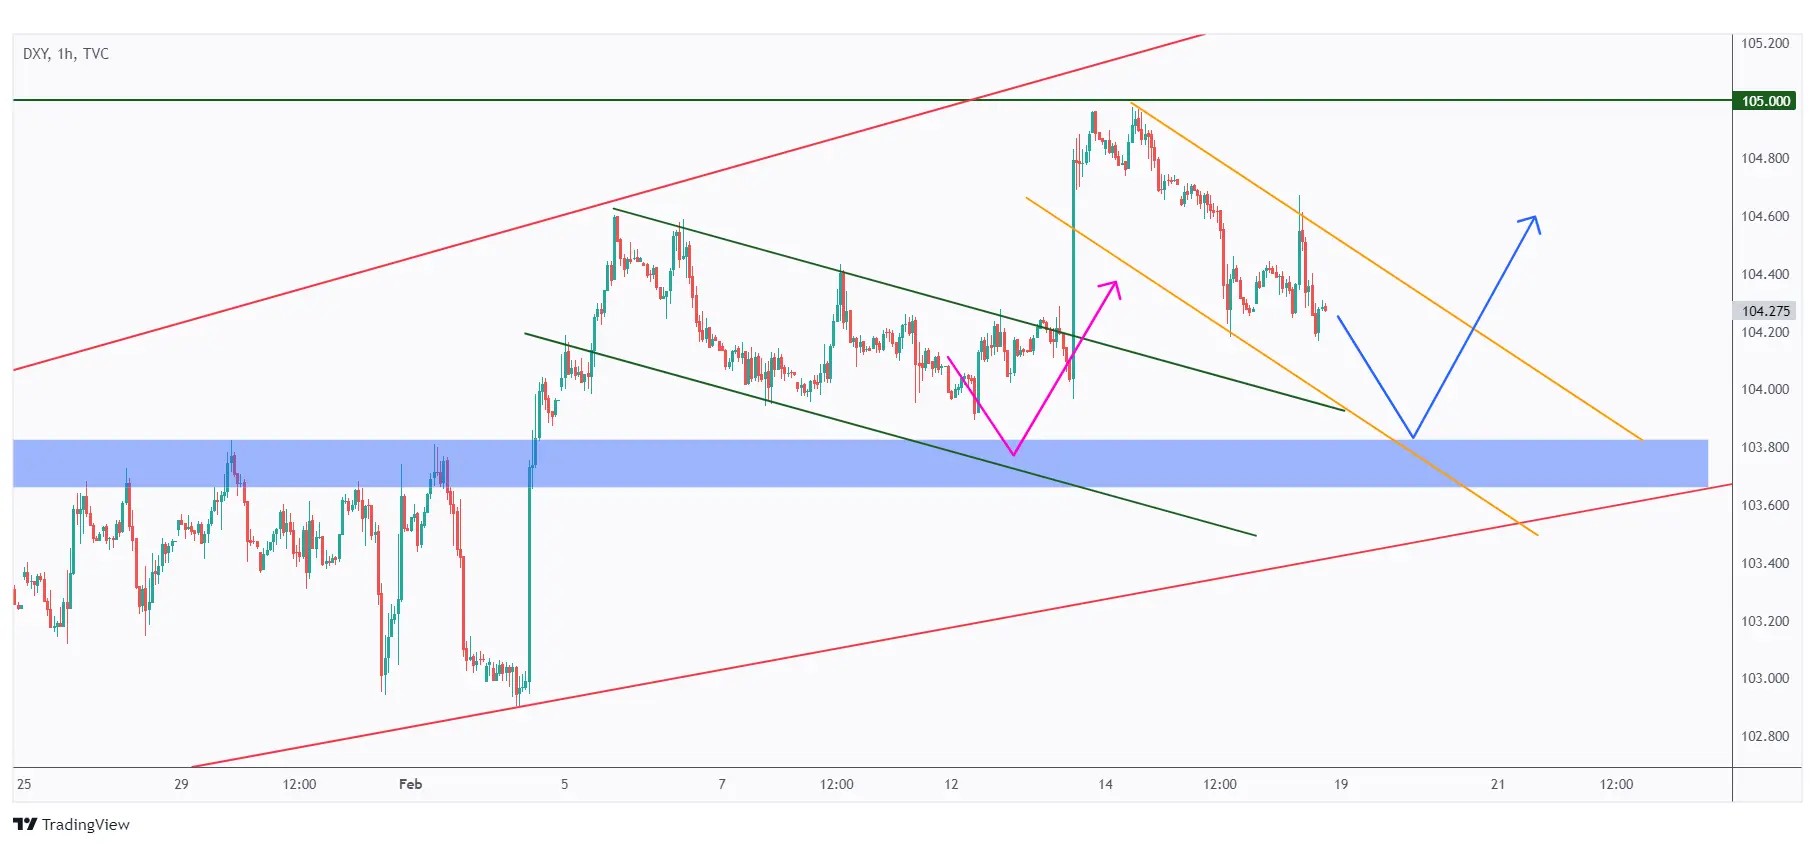 DXY 1h overall trend is still bullish and we are awaiting for a break above the falling channel for the bulls to take over again.